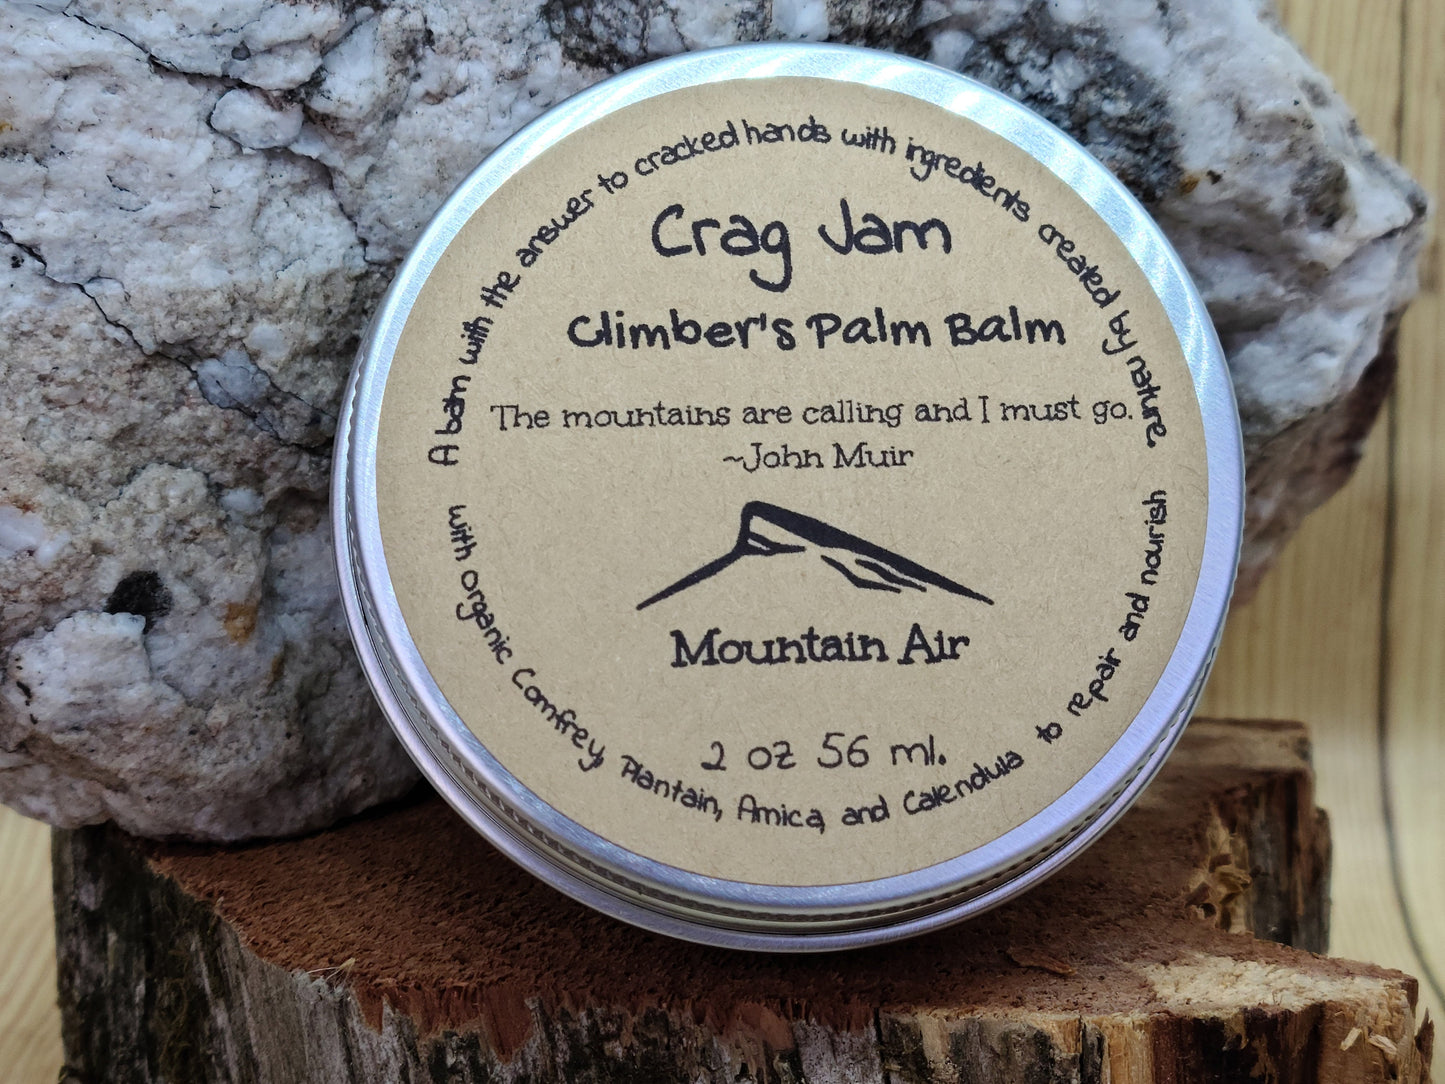 Crag Jam Climber's Palm Balm, Organic, Repair, Weight Lifting, Gardening, Moisturizes, Protects, Foot Balm, Working Hands, Sustainable